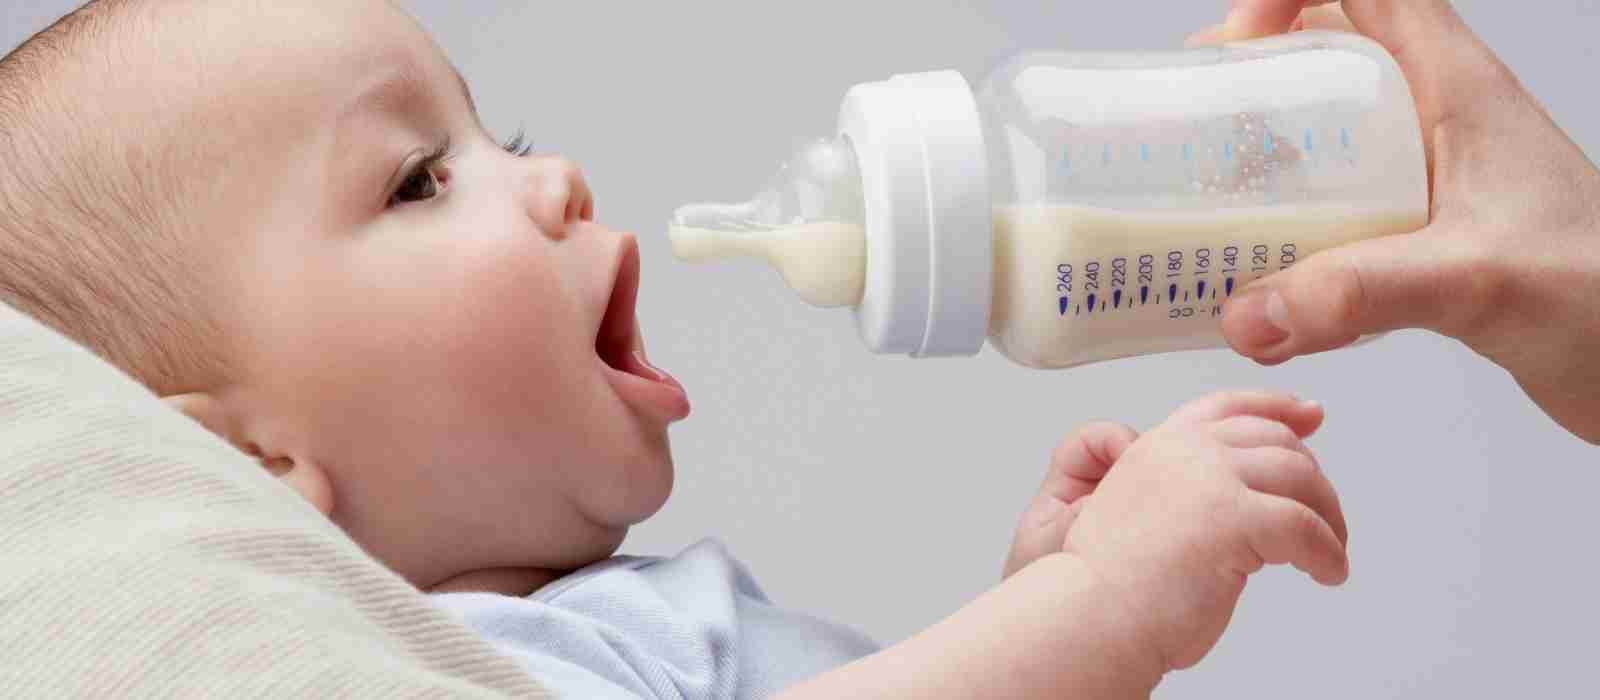 What Happens If Baby Drinks Old Formula